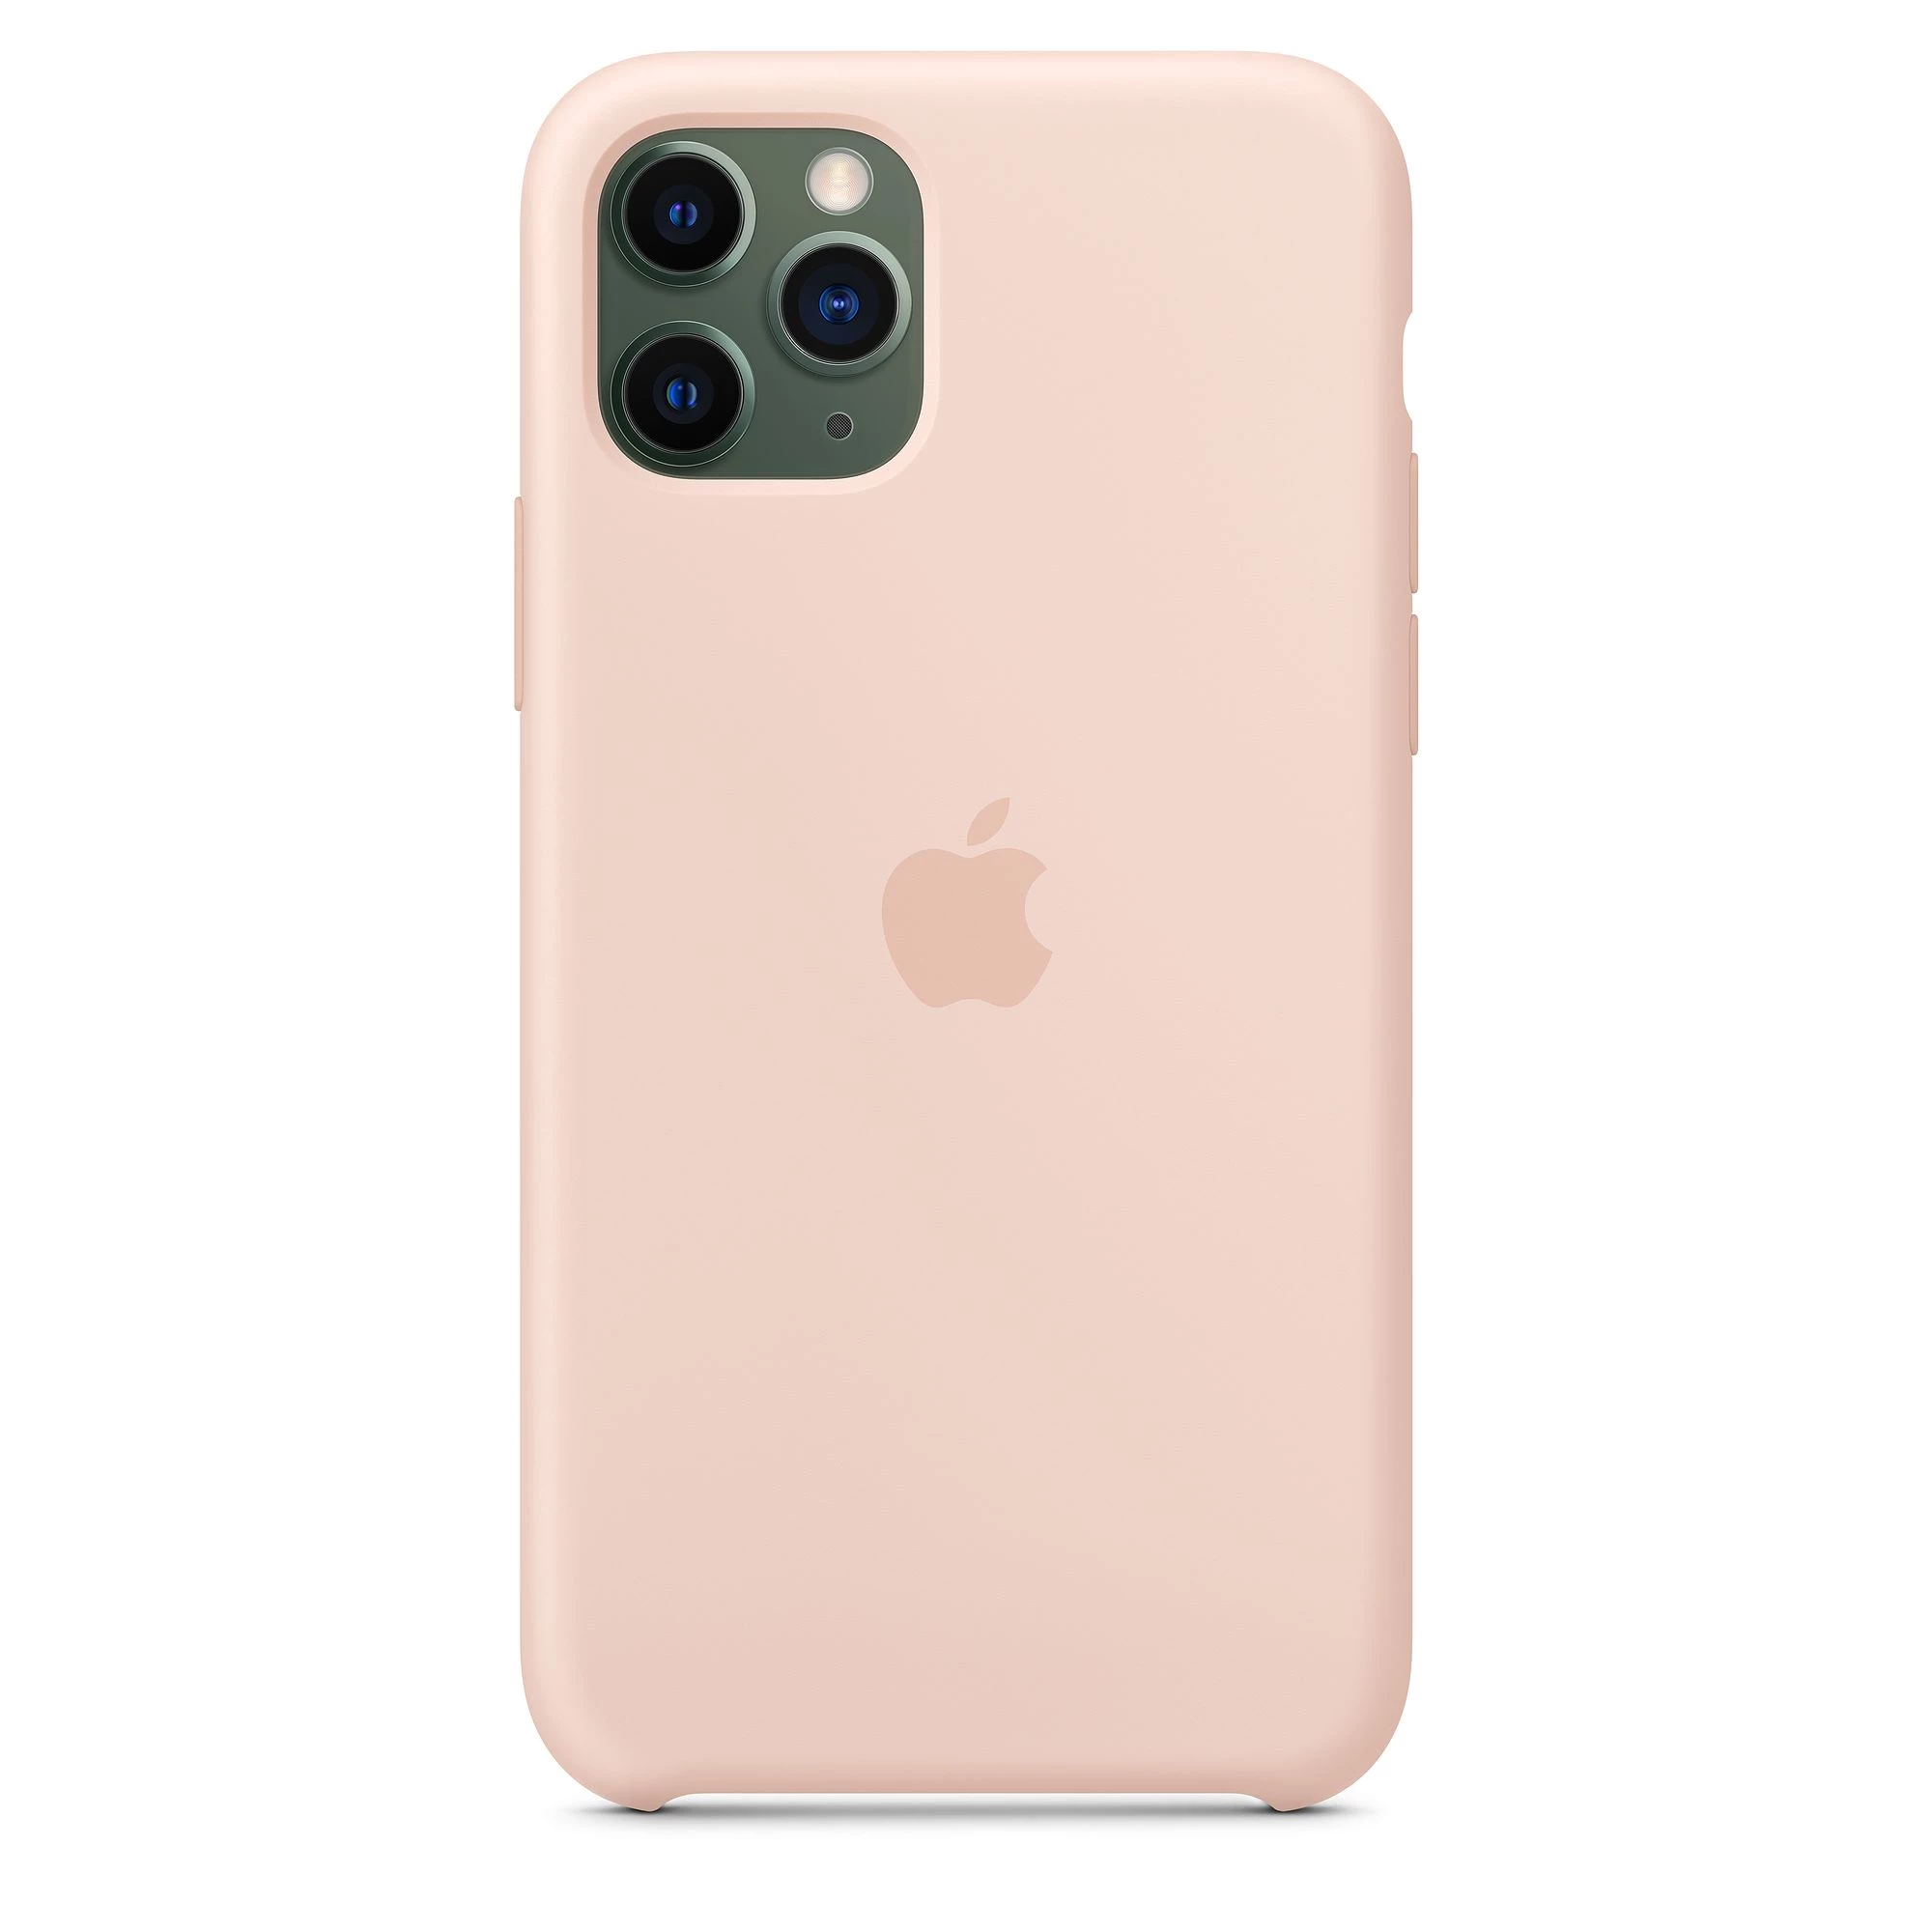 Apple iPhone 11 Pro Max Silicone Case - Pink Sand (MWYY2)